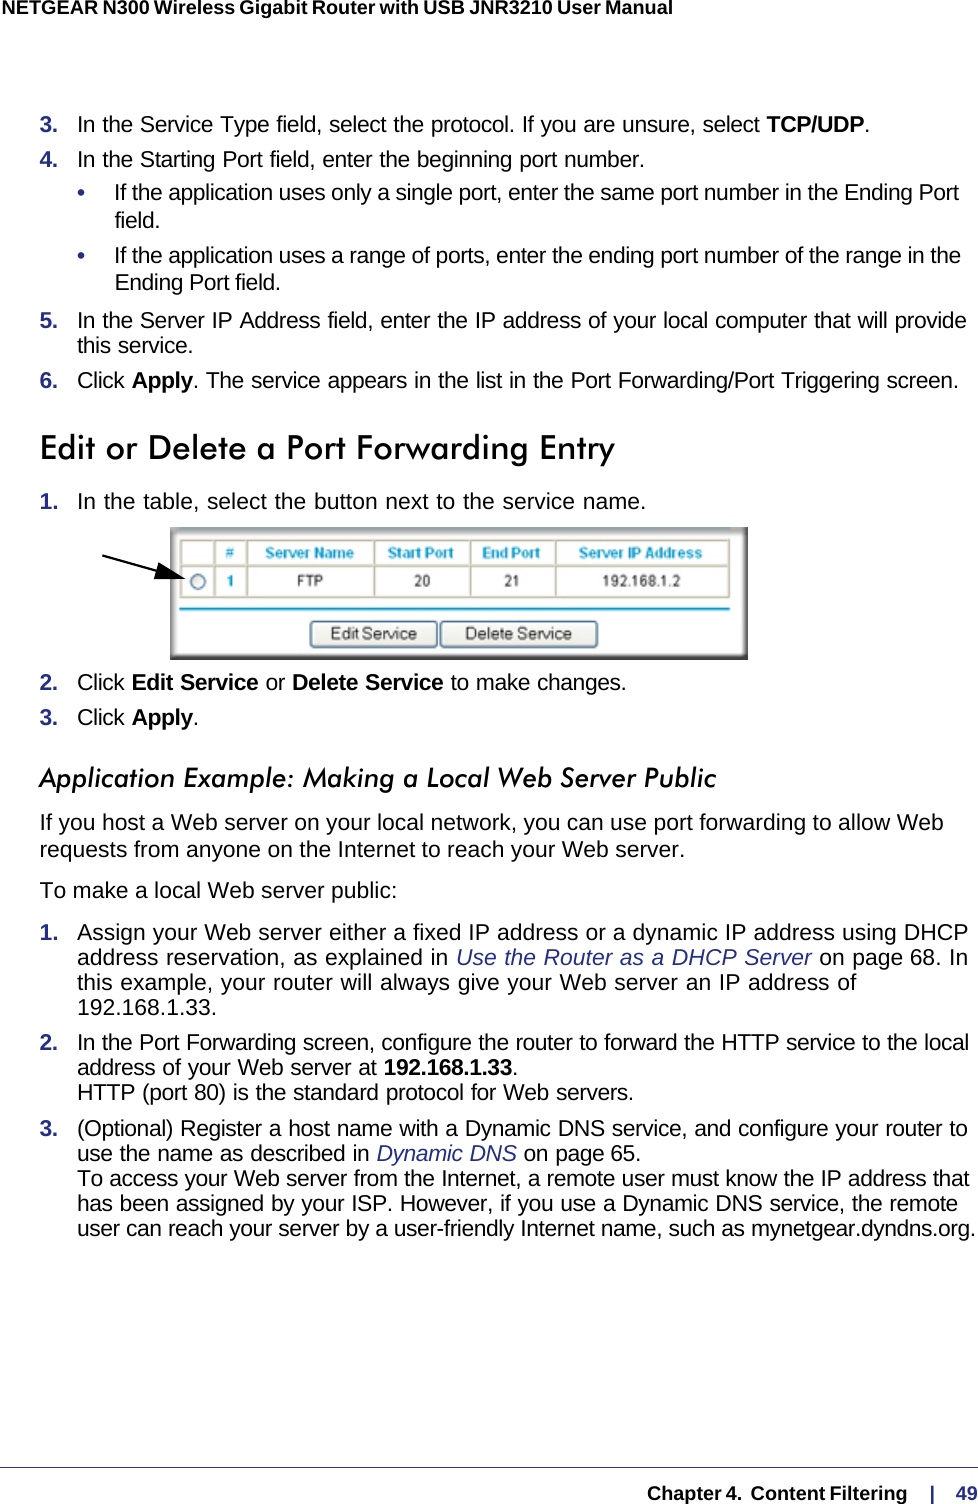   Chapter 4.  Content Filtering     |    49NETGEAR N300 Wireless Gigabit Router with USB JNR3210 User Manual 3.  In the Service Type field, select the protocol. If you are unsure, select TCP/UDP.4.  In the Starting Port field, enter the beginning port number. •     If the application uses only a single port, enter the same port number in the Ending Port field.•     If the application uses a range of ports, enter the ending port number of the range in the Ending Port field.5.  In the Server IP Address field, enter the IP address of your local computer that will provide this service.6.  Click Apply. The service appears in the list in the Port Forwarding/Port Triggering screen.Edit or Delete a Port Forwarding Entry1.  In the table, select the button next to the service name.2.  Click Edit Service or Delete Service to make changes.3.  Click Apply.Application Example: Making a Local Web Server PublicIf you host a Web server on your local network, you can use port forwarding to allow Web requests from anyone on the Internet to reach your Web server. To make a local Web server public:1.  Assign your Web server either a fixed IP address or a dynamic IP address using DHCP address reservation, as explained in Use the Router as a DHCP Server on page  68. In this example, your router will always give your Web server an IP address of 192.168.1.33. 2.  In the Port Forwarding screen, configure the router to forward the HTTP service to the local address of your Web server at 192.168.1.33.  HTTP (port 80) is the standard protocol for Web servers.3.  (Optional) Register a host name with a Dynamic DNS service, and configure your router to use the name as described in Dynamic DNS on page 65.  To access your Web server from the Internet, a remote user must know the IP address that has been assigned by your ISP. However, if you use a Dynamic DNS service, the remote user can reach your server by a user-friendly Internet name, such as mynetgear.dyndns.org.